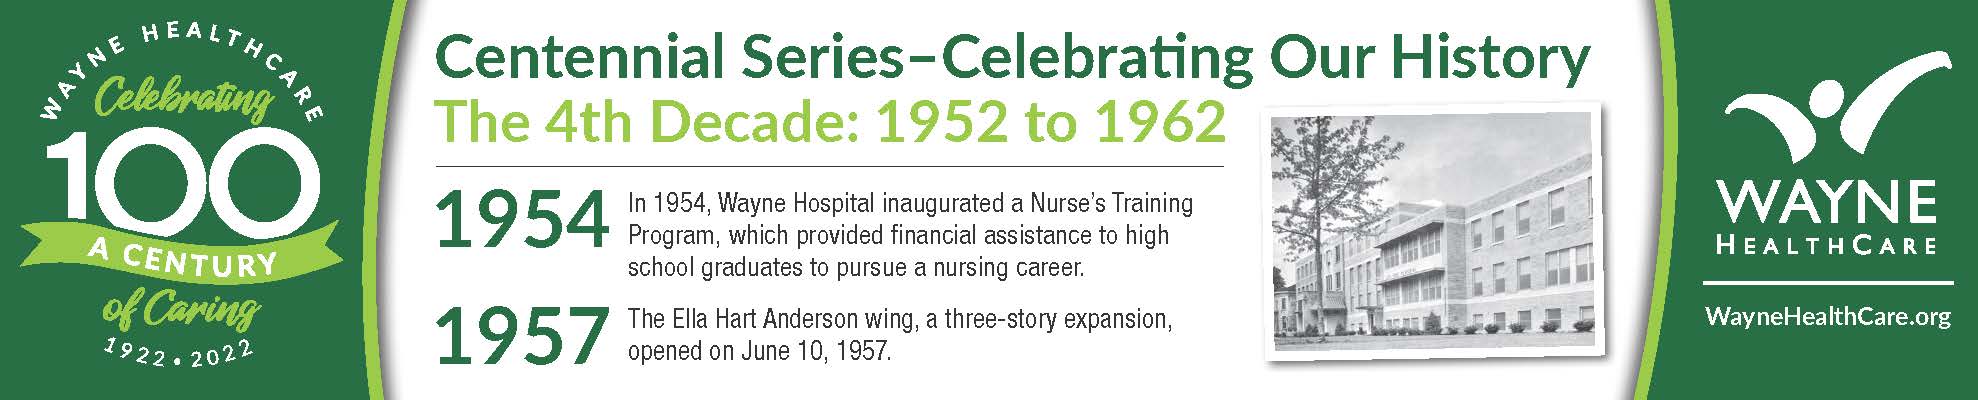 4th Decade Centennial  information about Wayne HealthCare Picture of Elle Hart Anderson wing